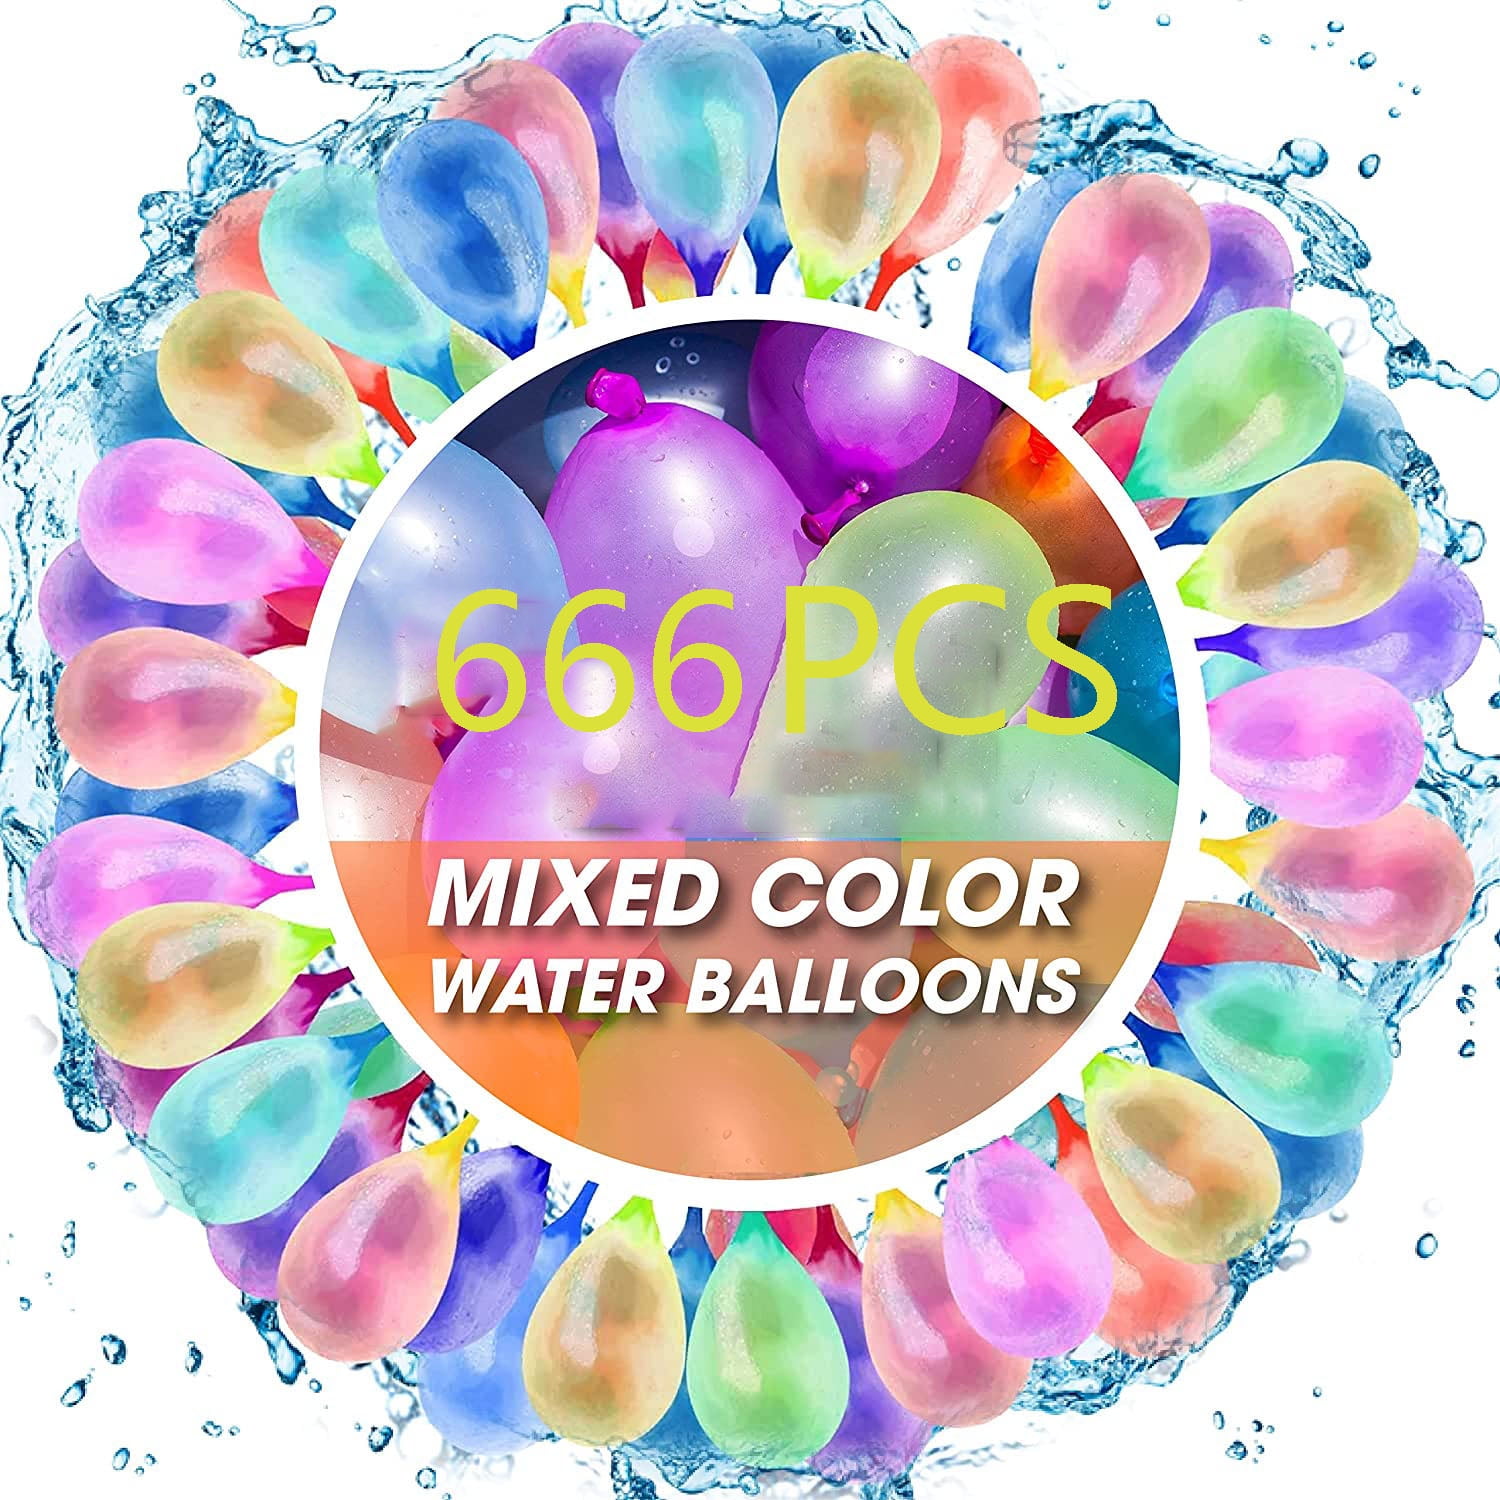 Swimming Pool Outdoor Summer Fun for Kids Girls Boys Balloons Set Party Games Quick Fill Water Balloons 12 Bunch 440 pcs Rapid-Fill Water Balloons 